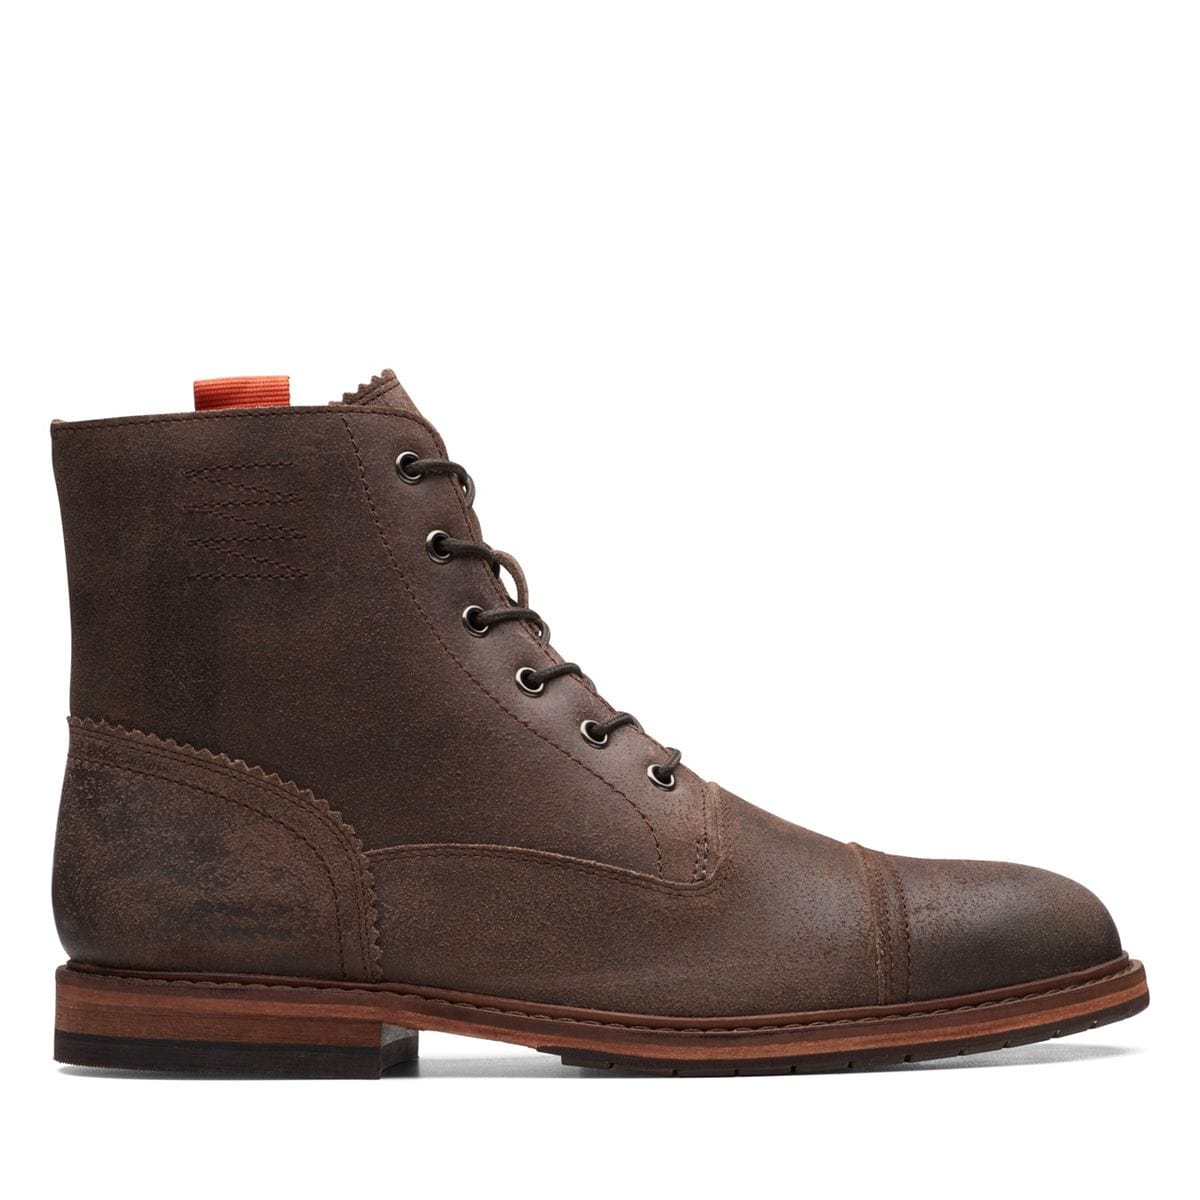 Sole to Soul - Clarks Mens Clarkdale West Dress Boots - Brown